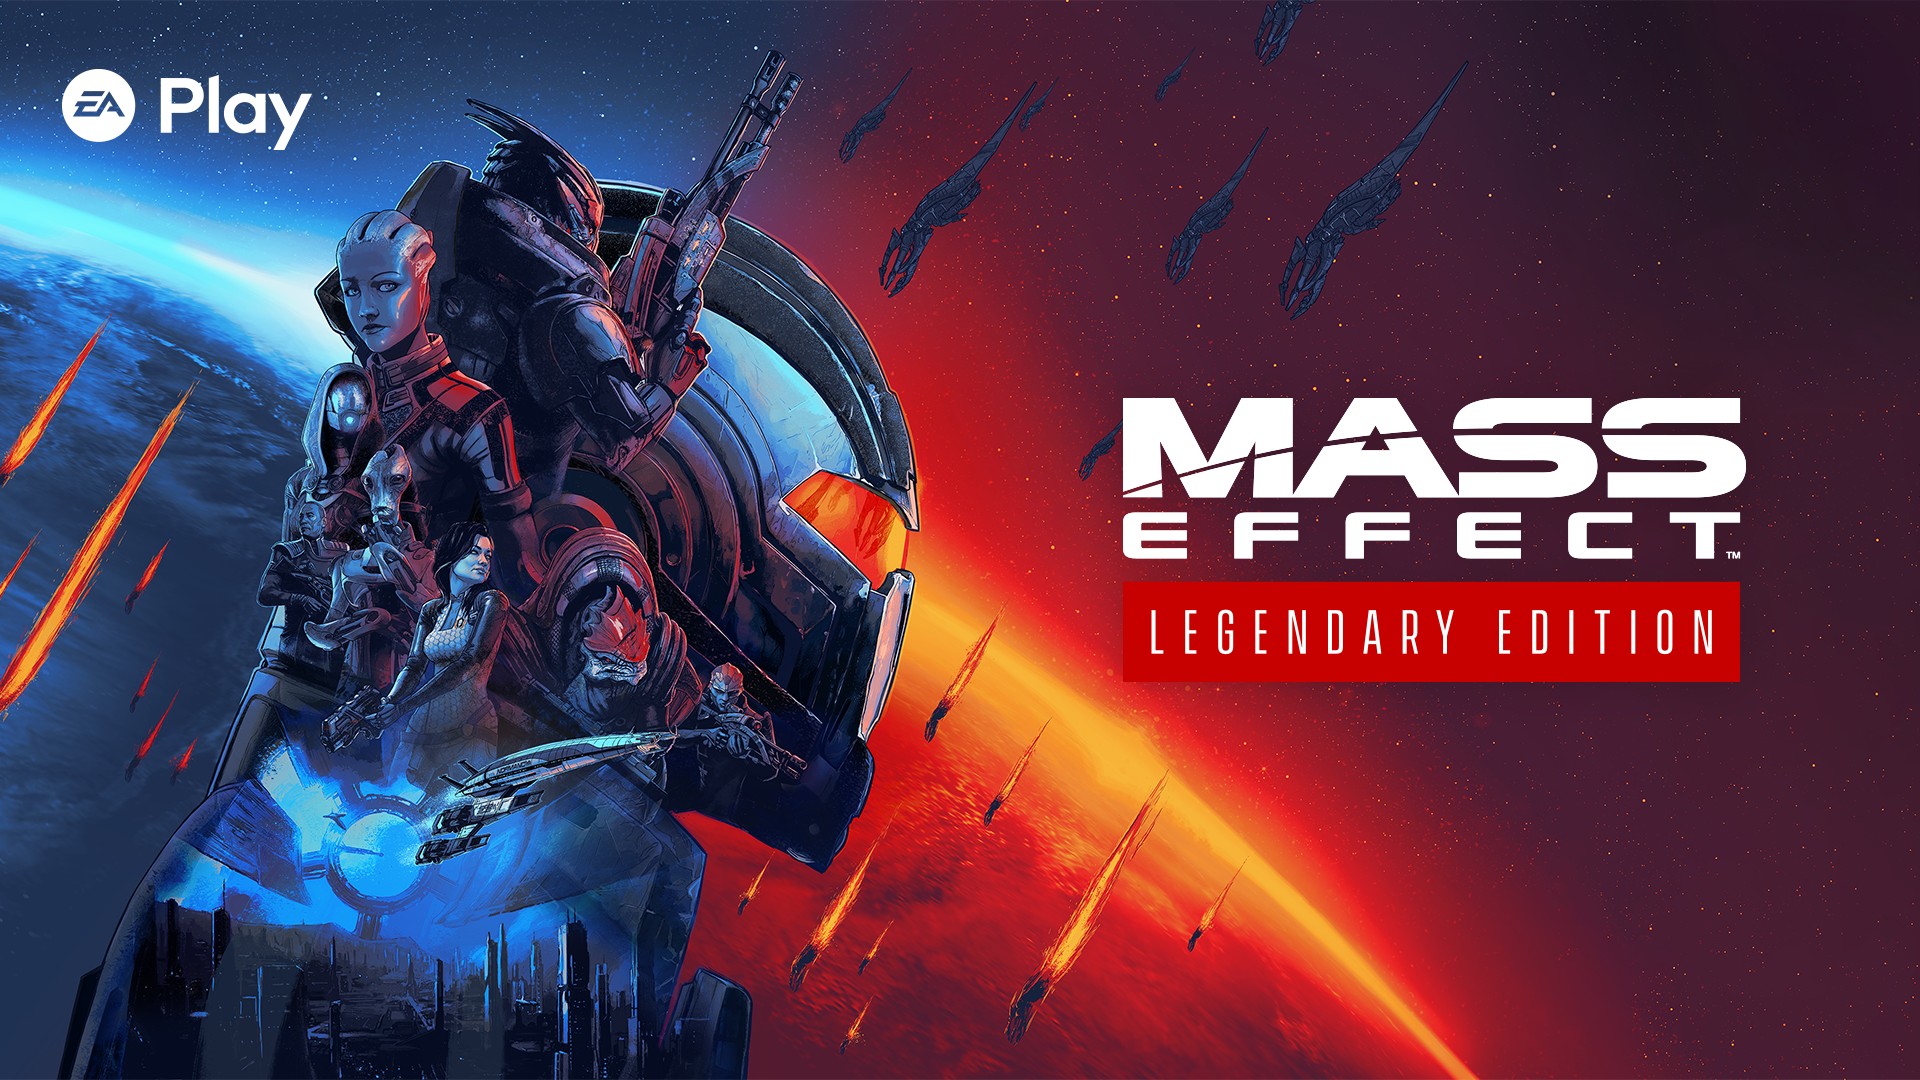 Mass Effect Legendary Edition (Console and PC) EA Play â€“ January 6